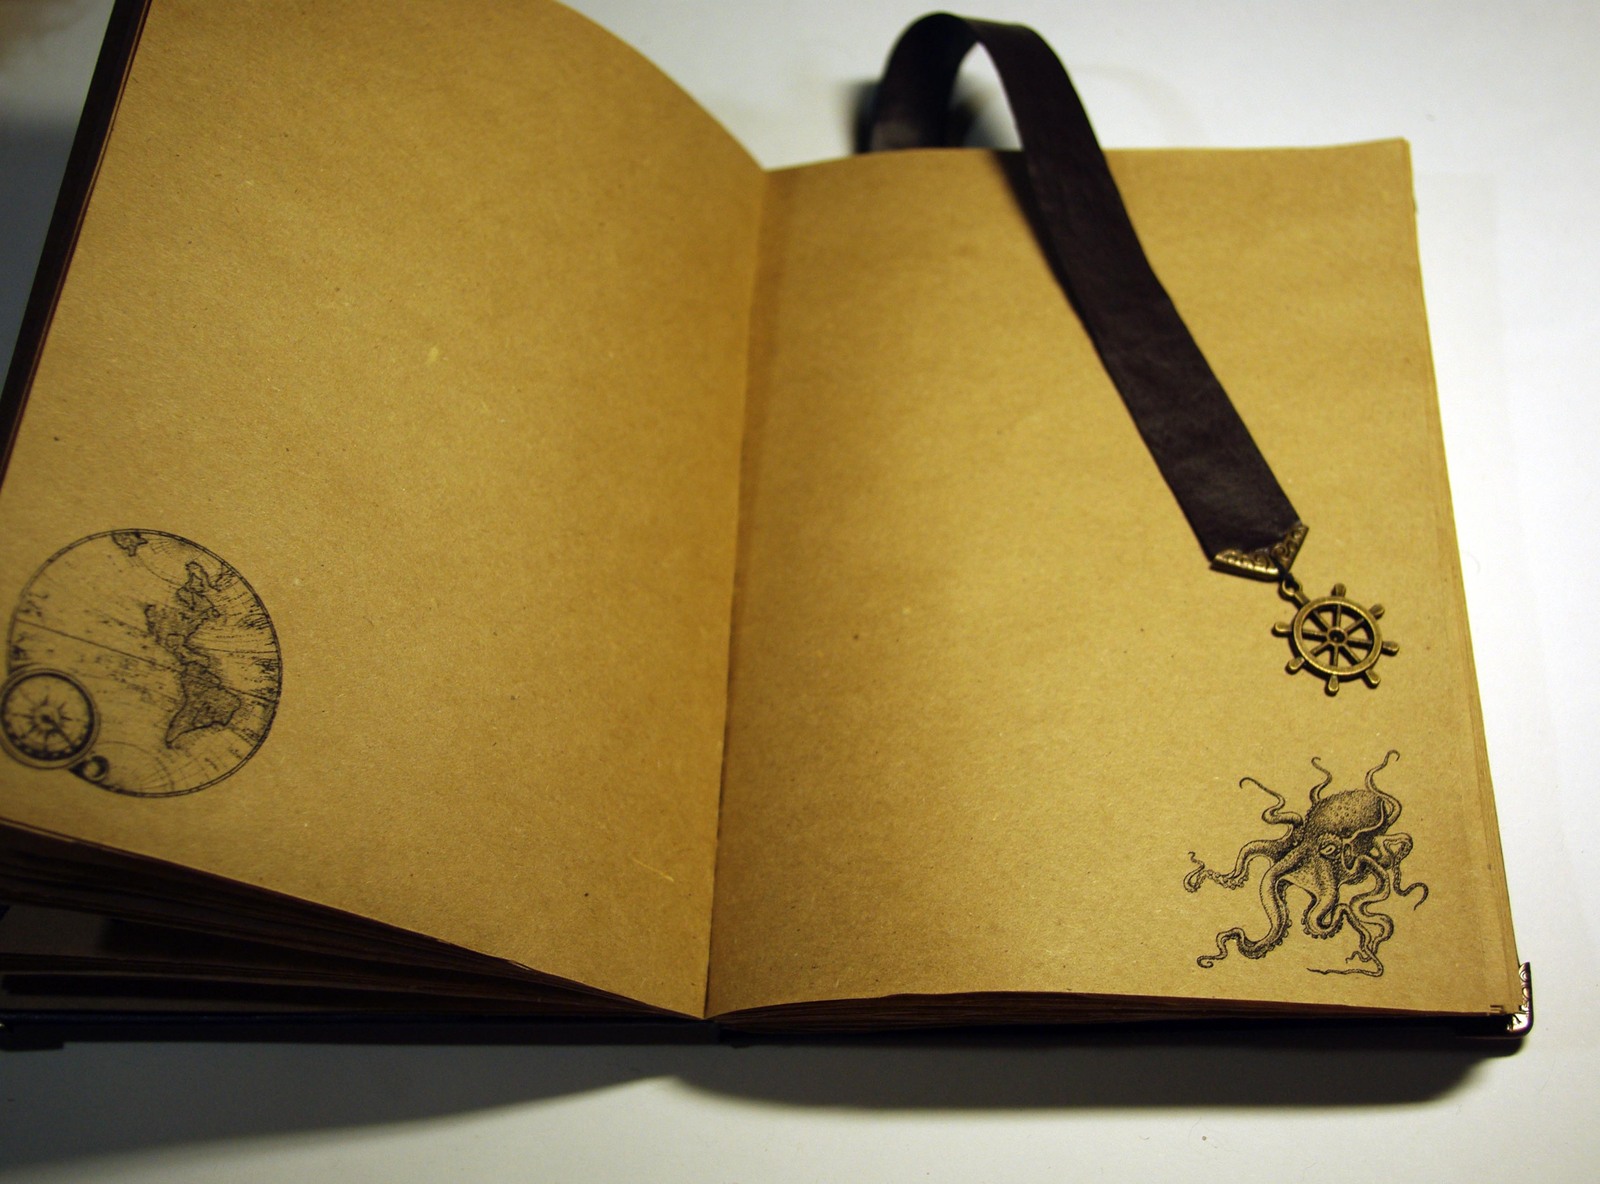 Traveler's book - My, With your own hands, Creation, Books, Binding, Longpost